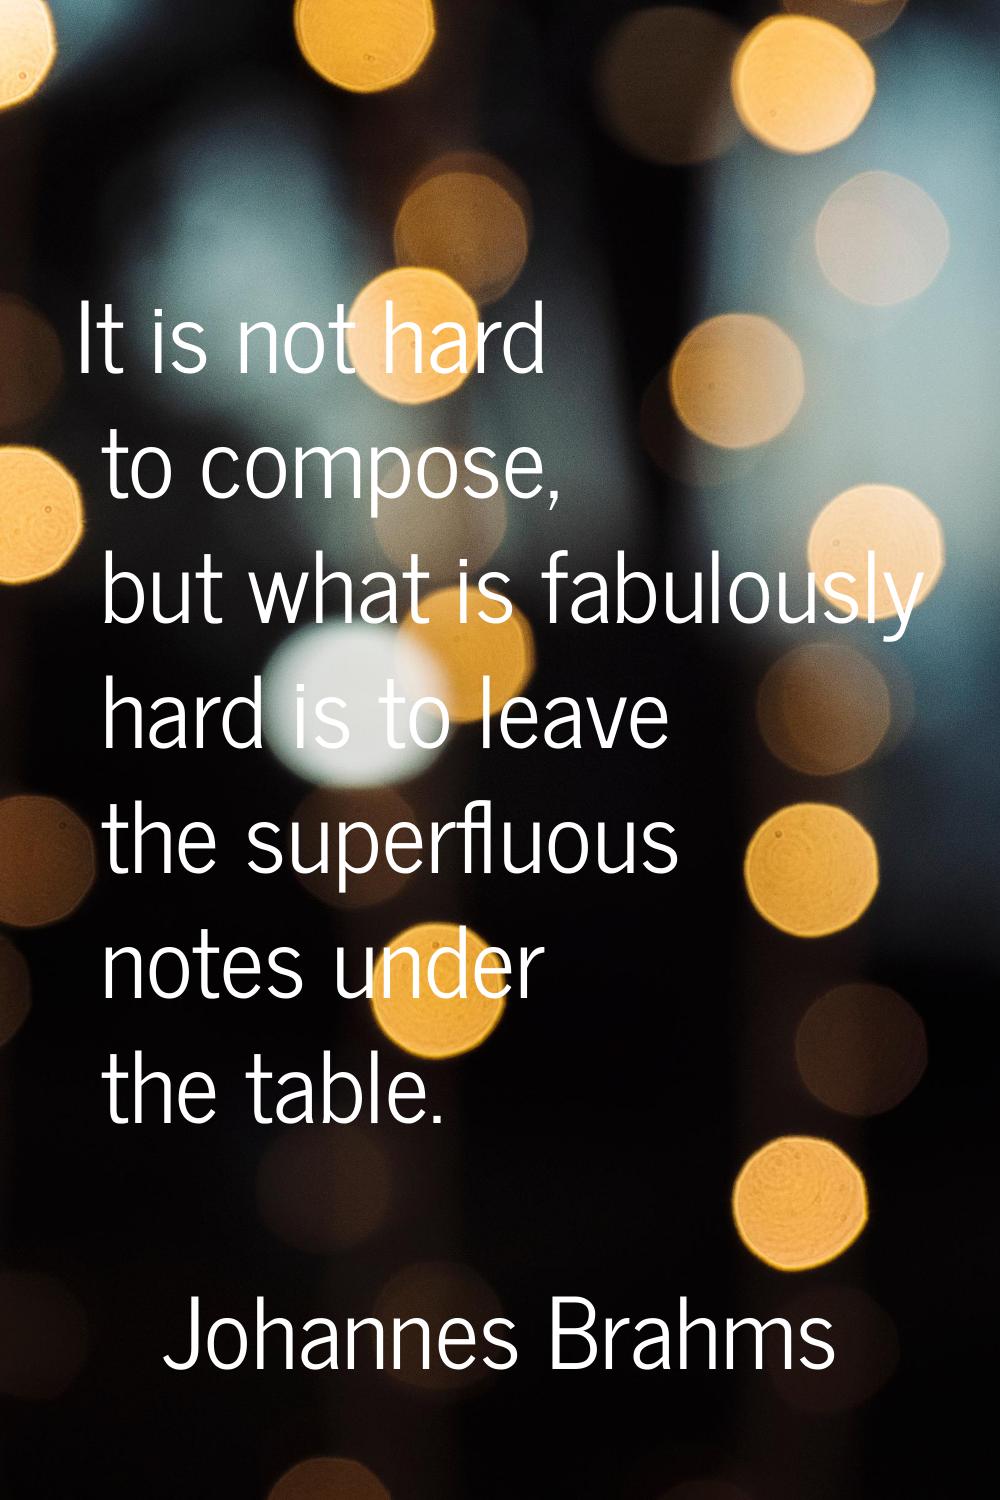 It is not hard to compose, but what is fabulously hard is to leave the superfluous notes under the 